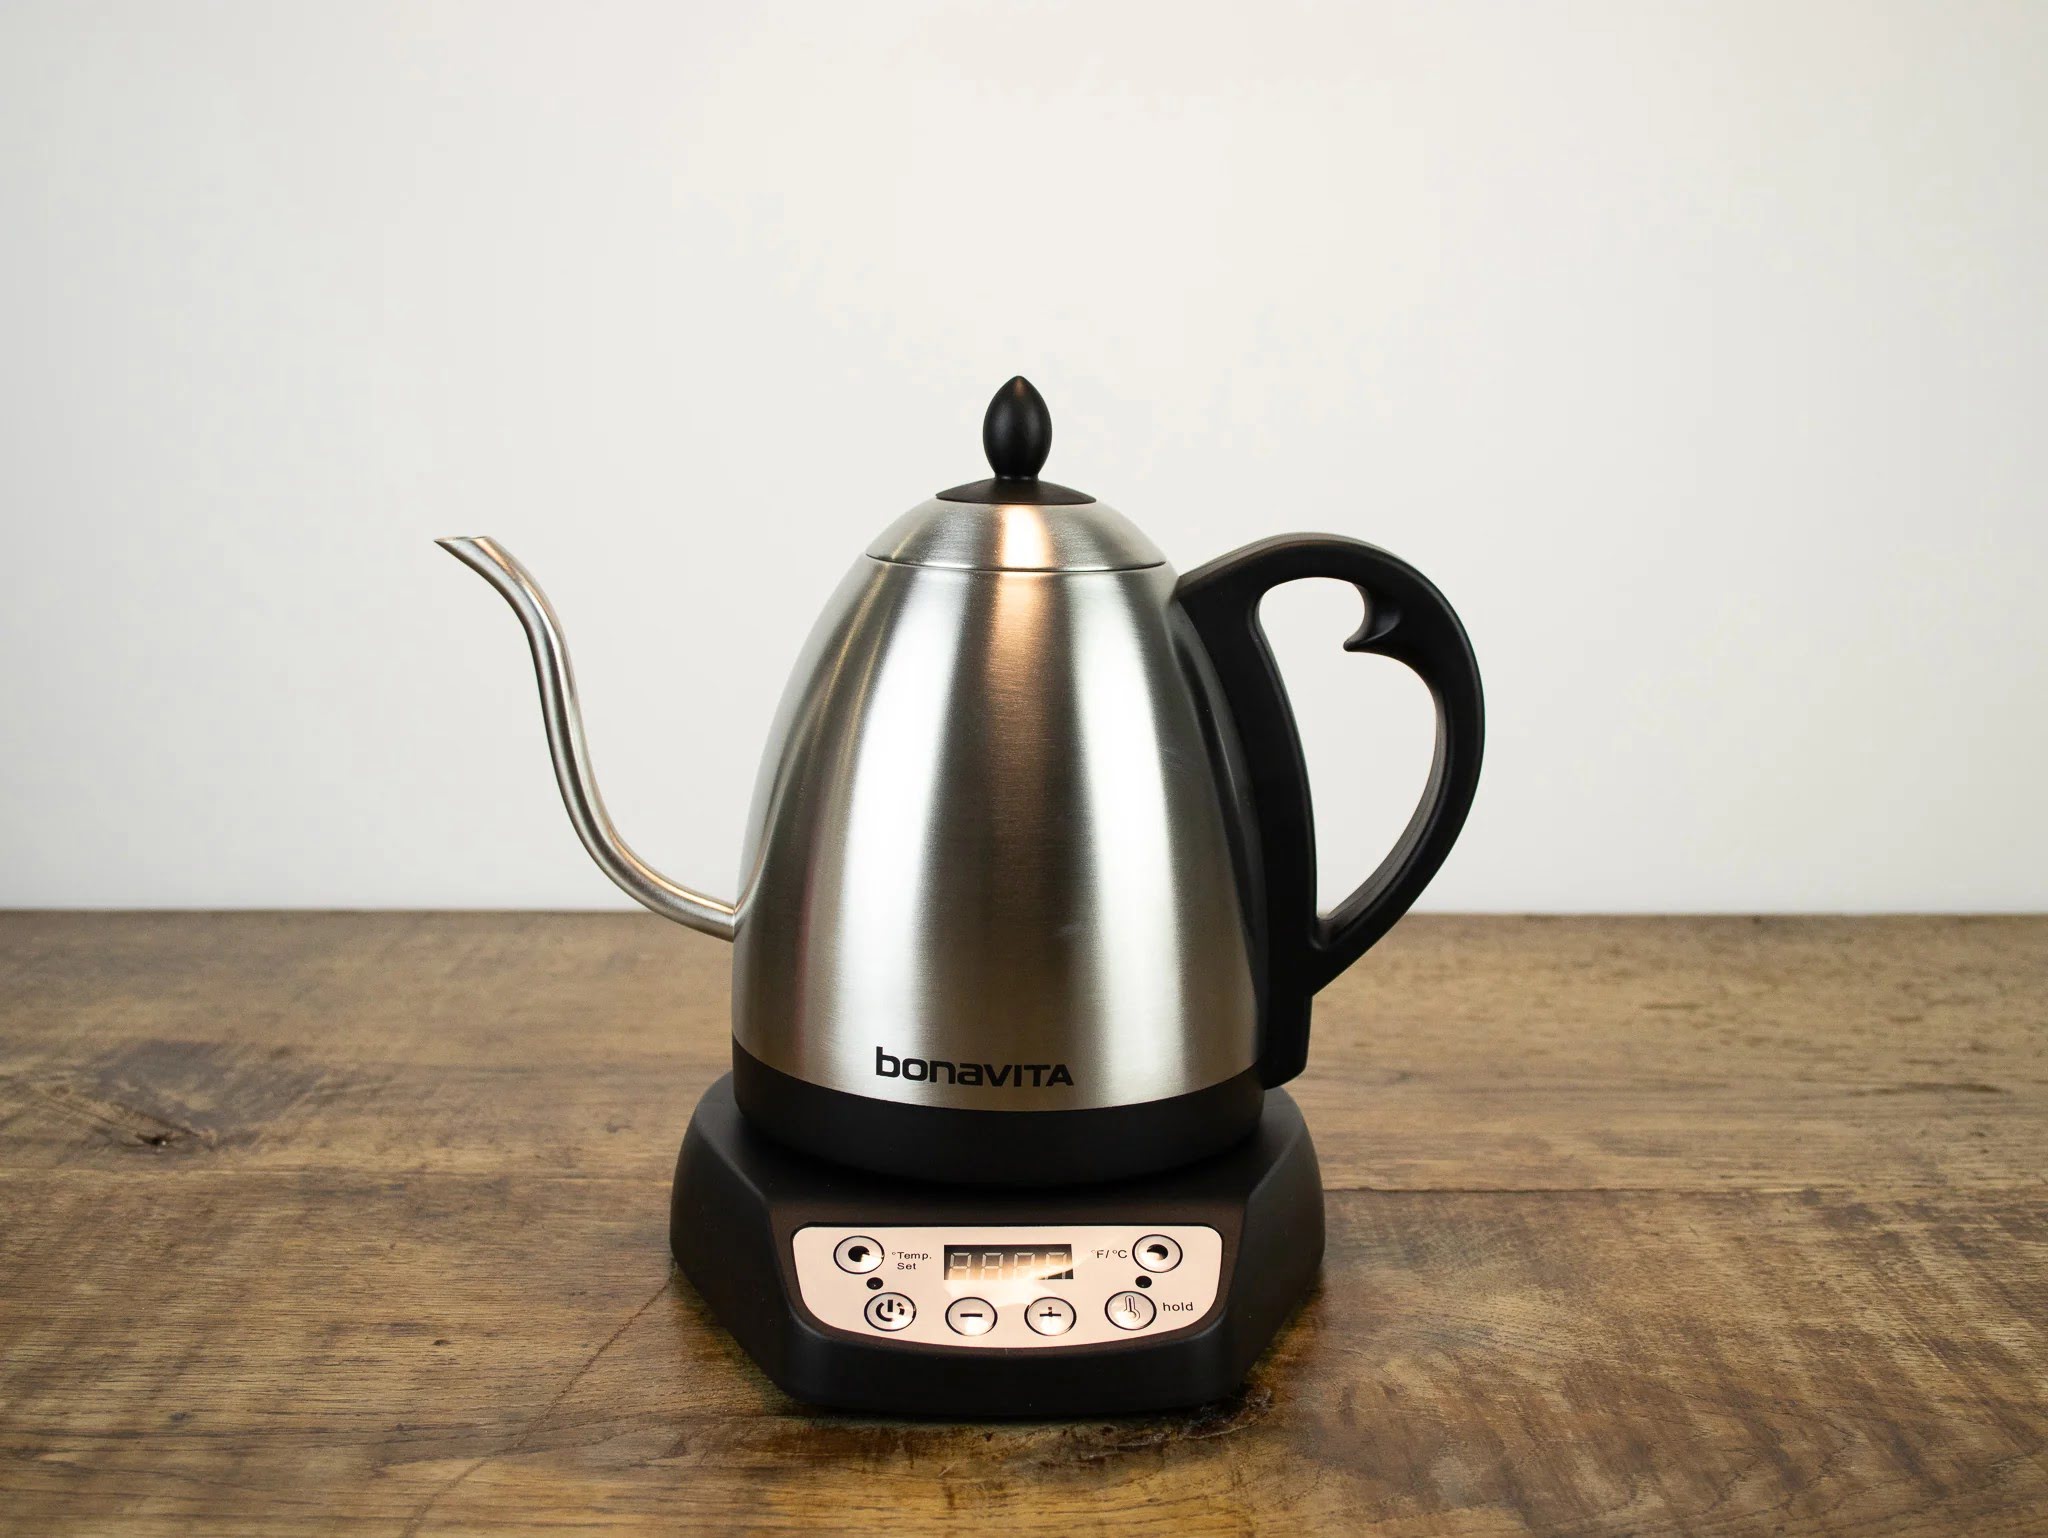 Zeppoli Electric Kettle Review: Simple and Speedy